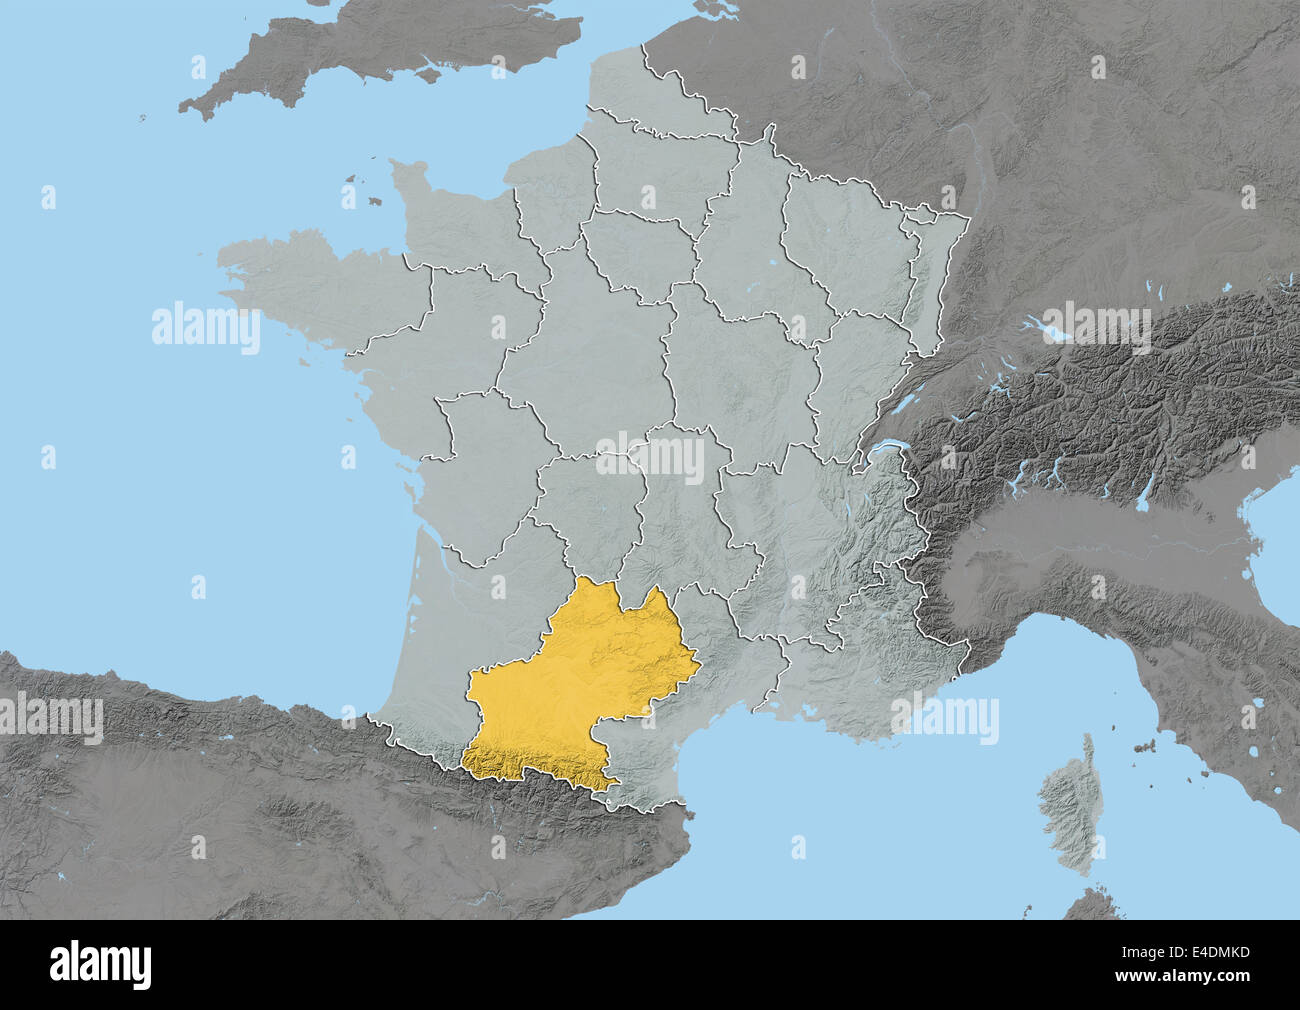 Region of Midi-Pyrenees, France, Relief Map Stock Photo